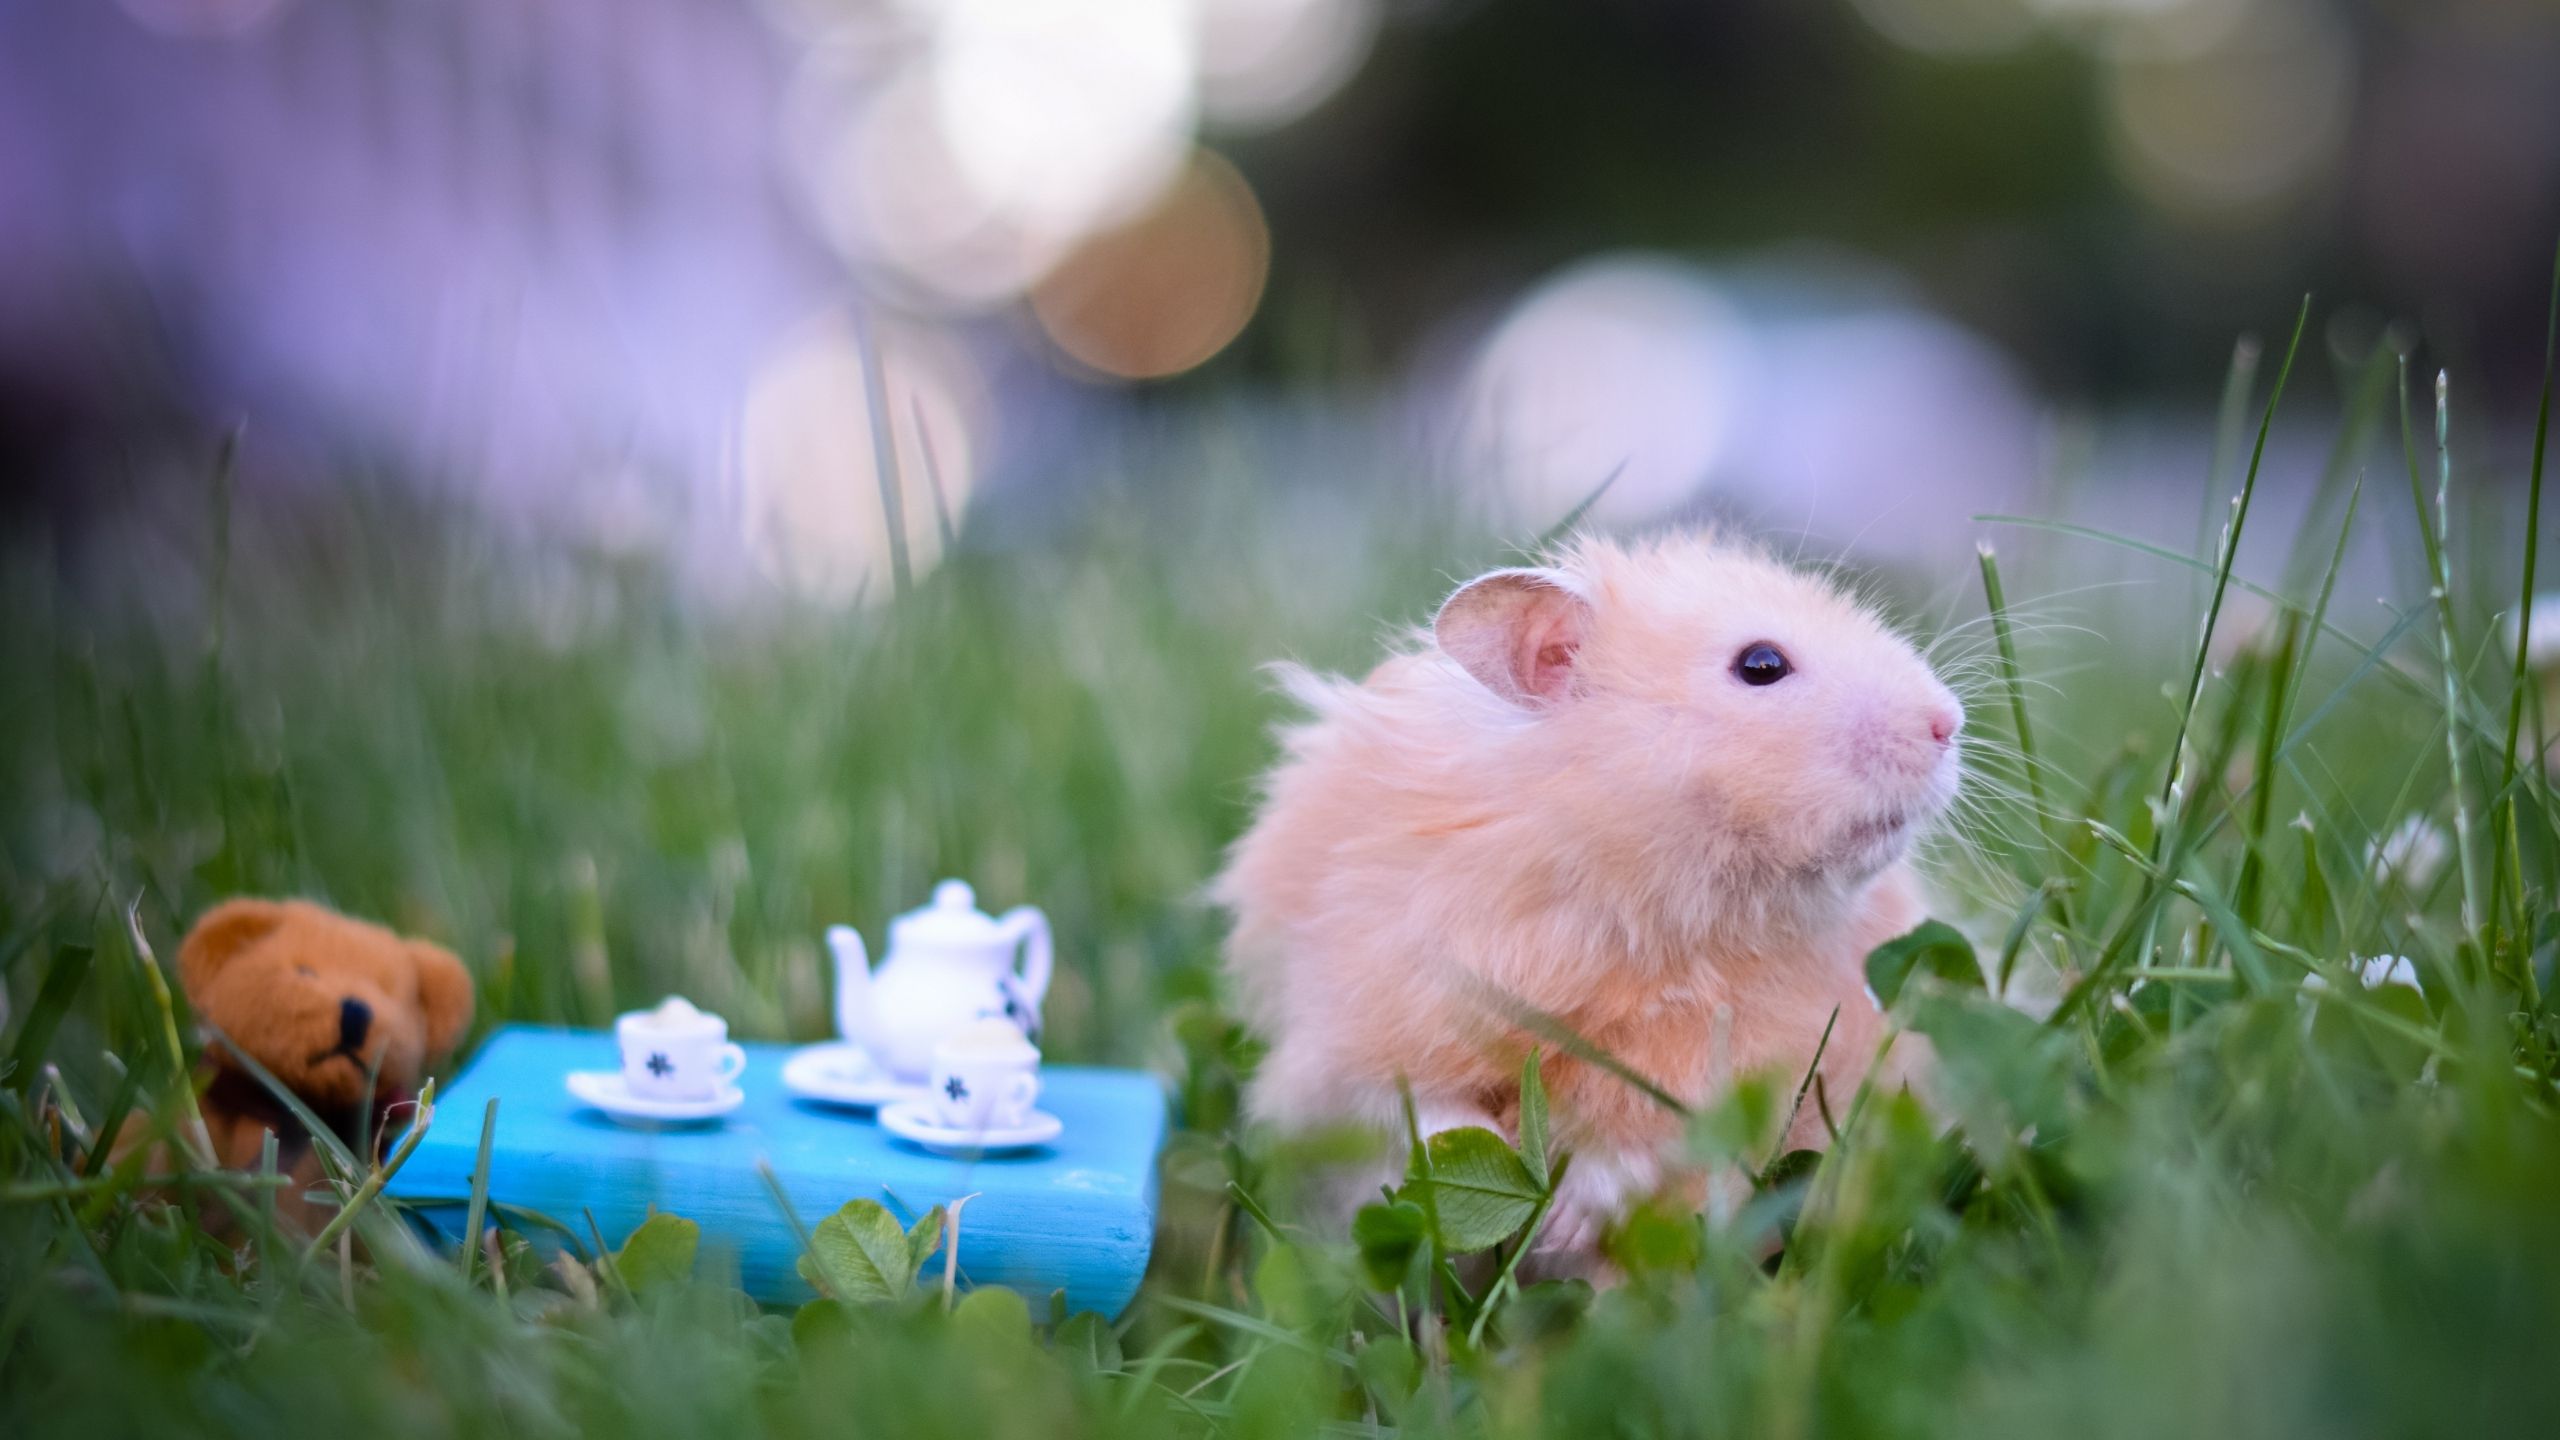 Free download on July 28 2015 By Stephen Comments Off on Cute Hamsters Wallpaper [2560x1440] for your Desktop, Mobile & Tablet. Explore Cute Hamster Wallpaper. Hamster Wallpaper, Hamster Wallpaper Desktop